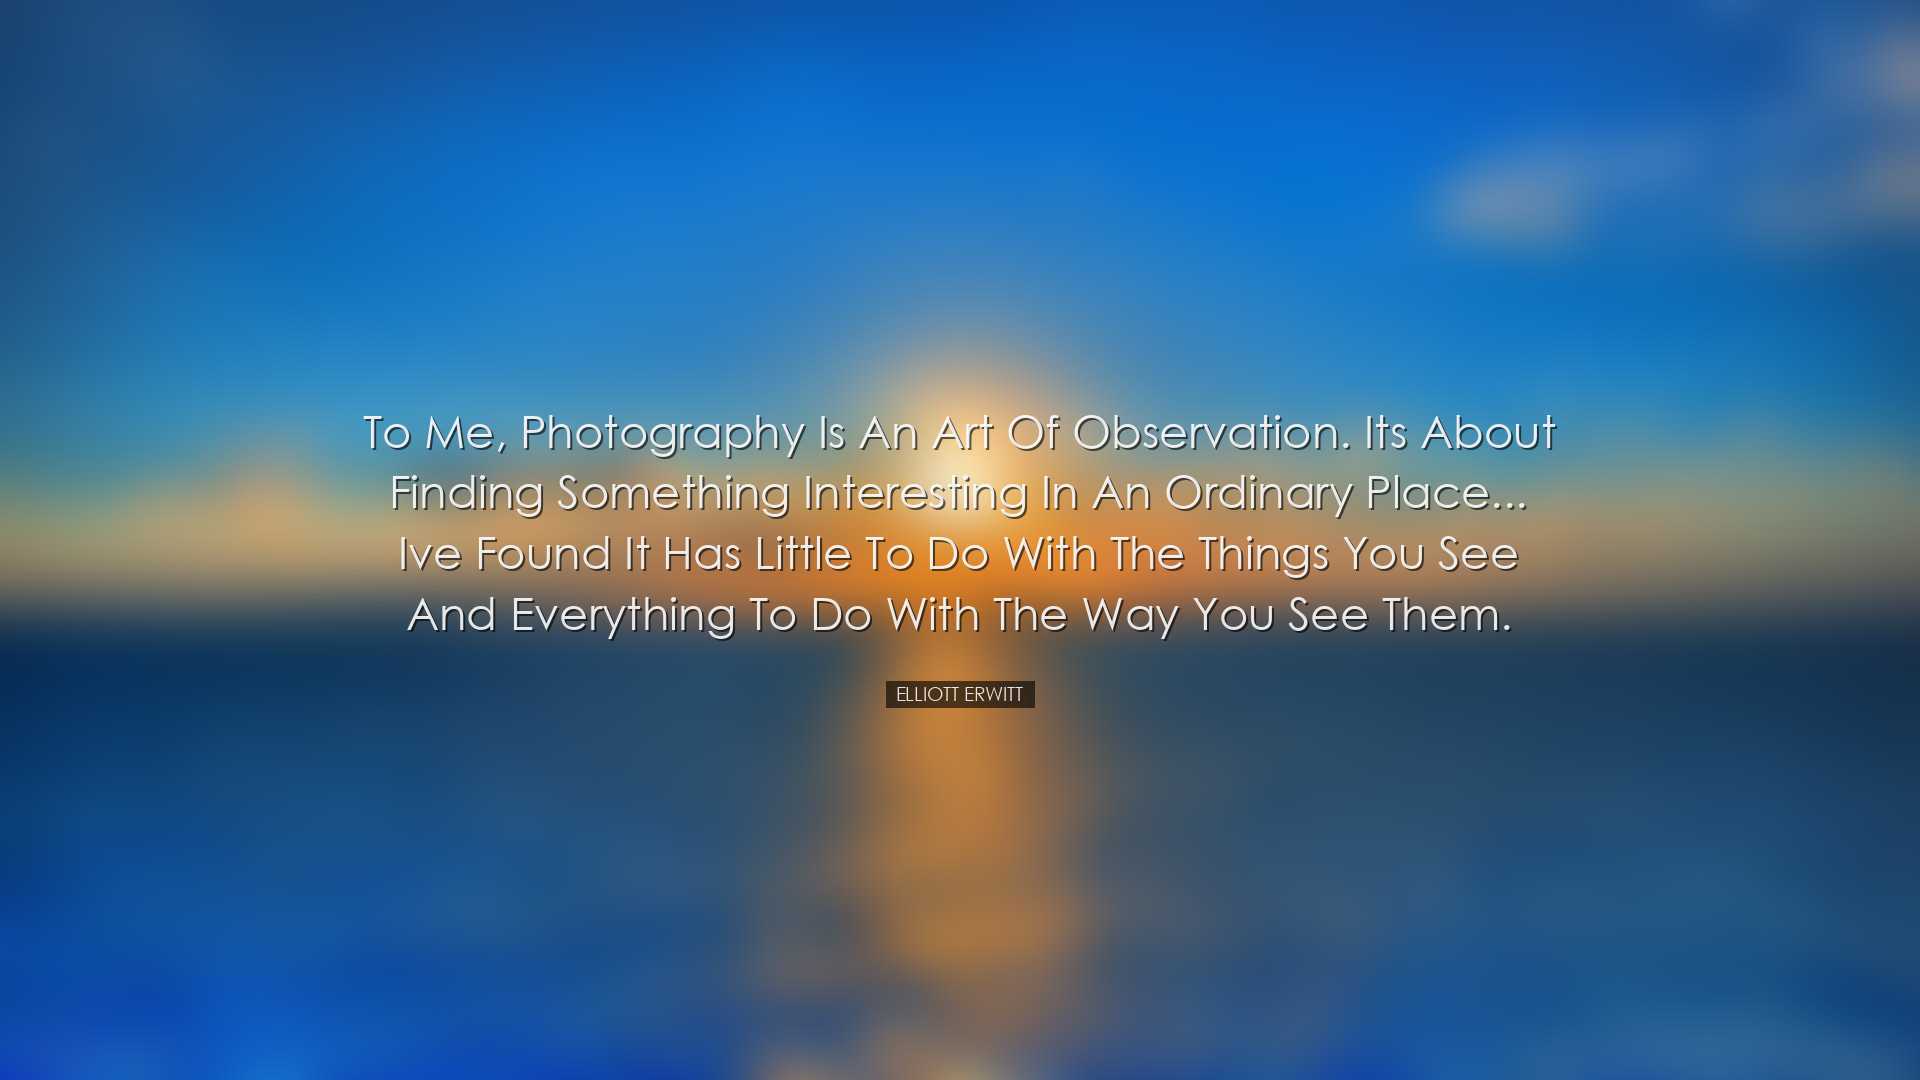 To me, photography is an art of observation. Its about finding som